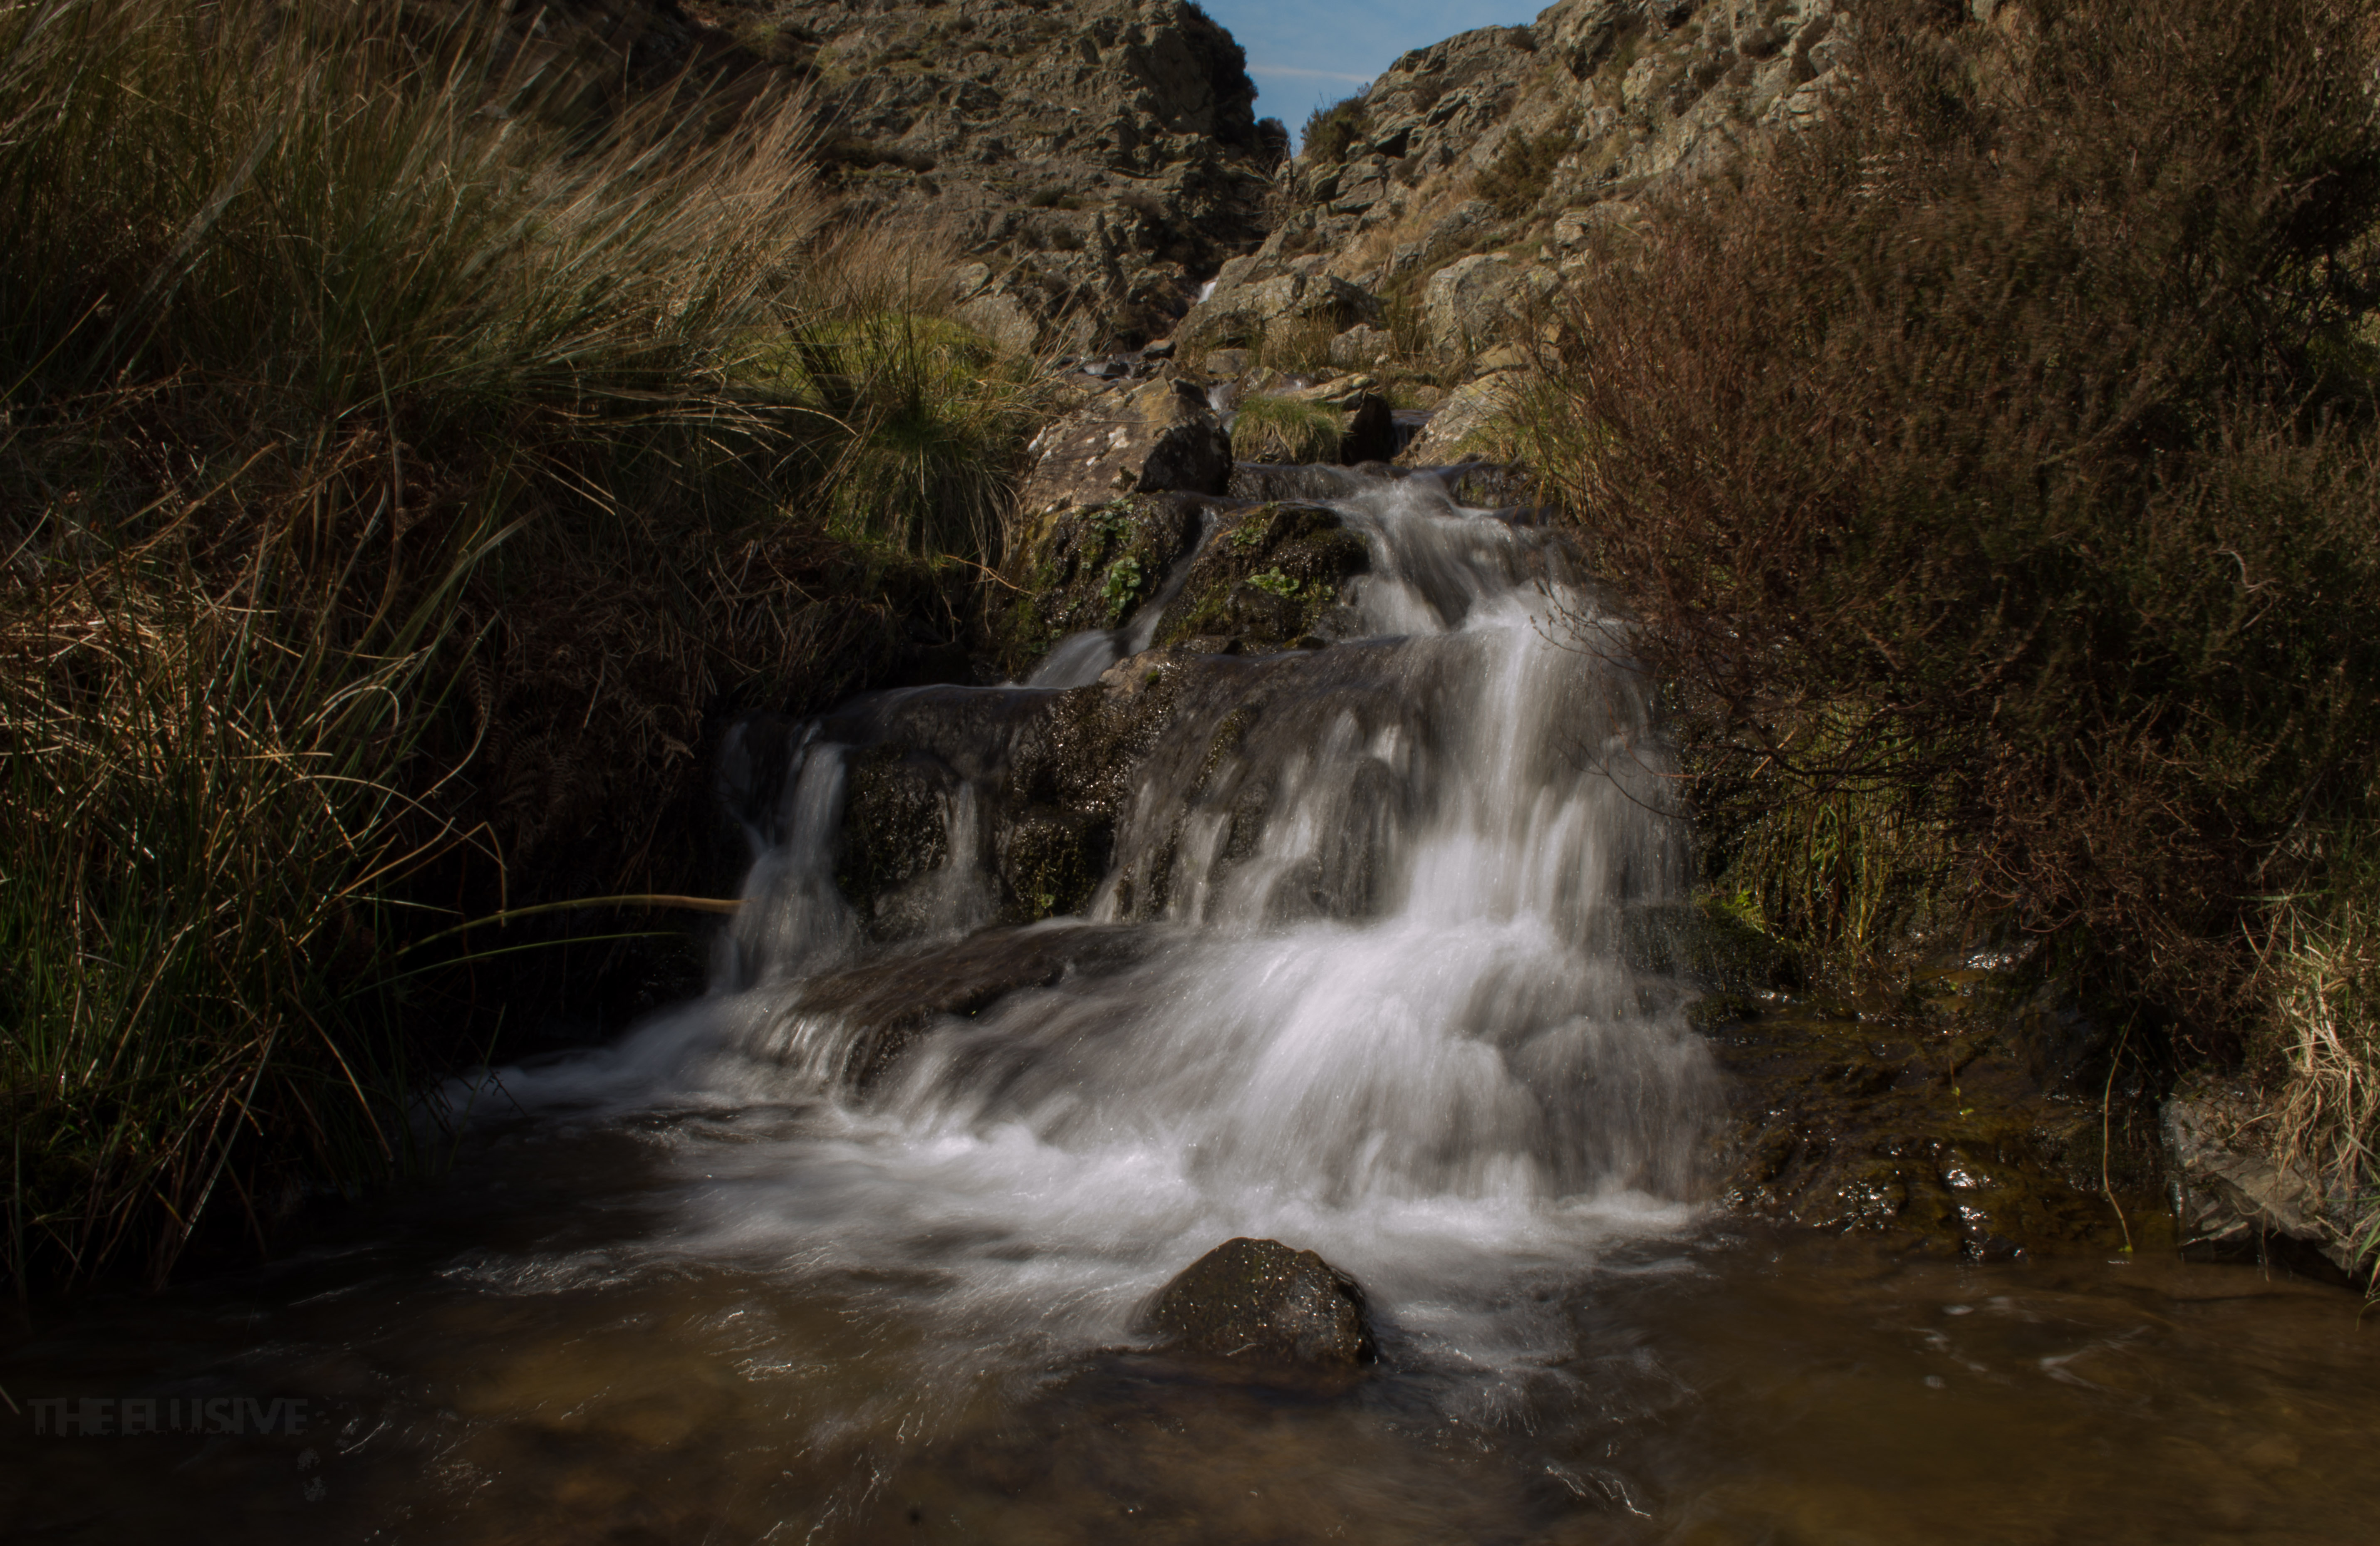 cardingmill valley waterfall (181 of 218)